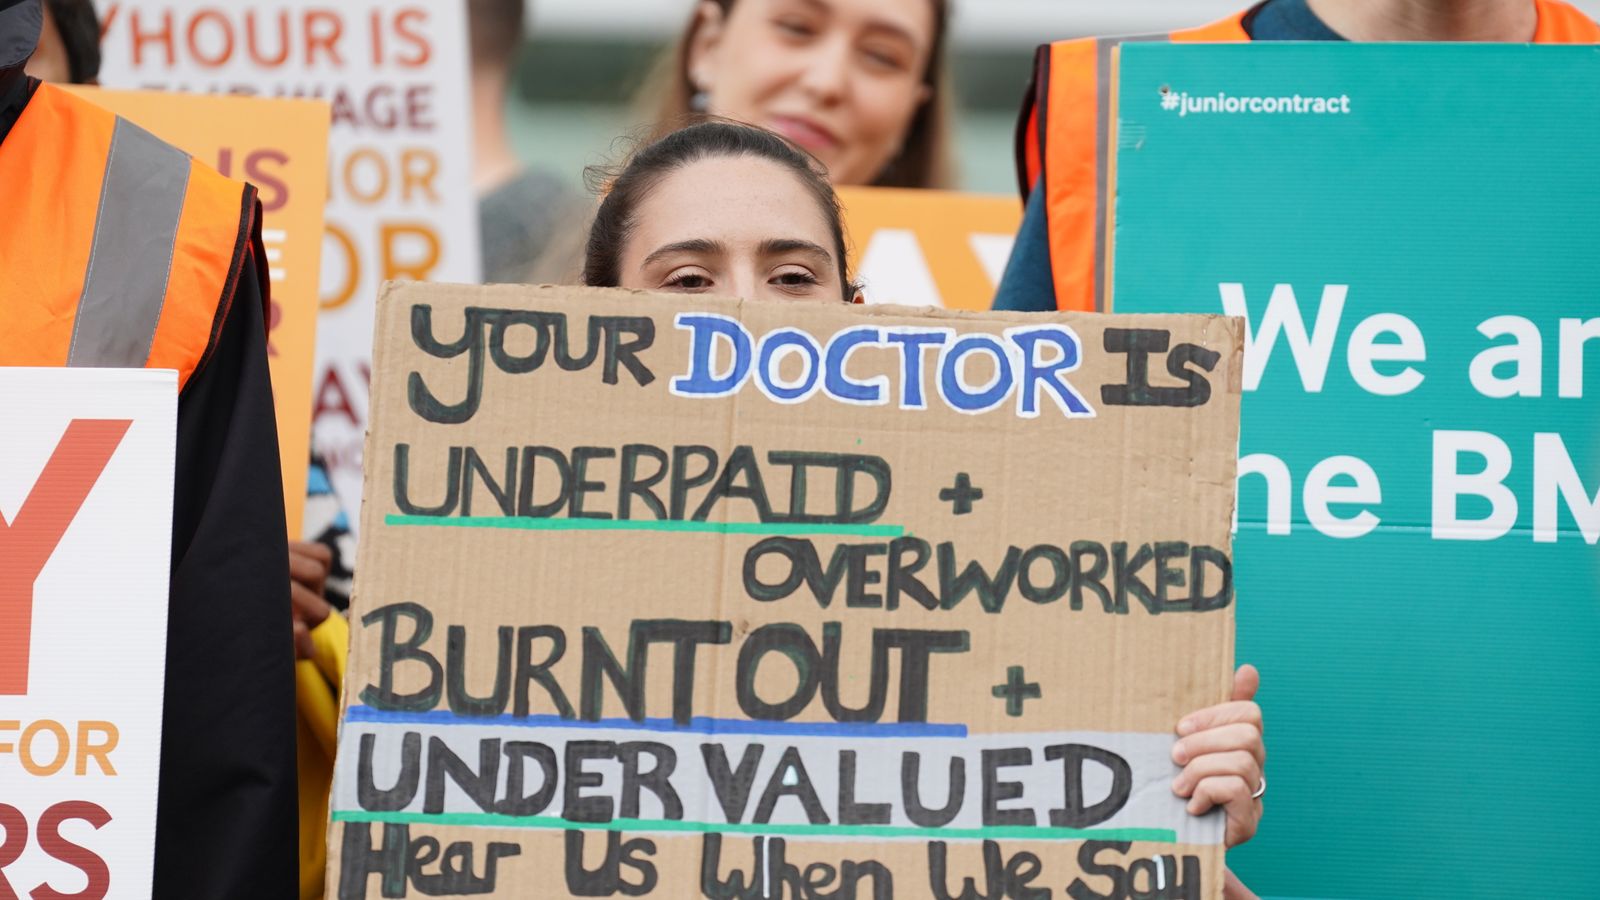 Strike talks continue between BMA and Government as doctors decide on next  steps